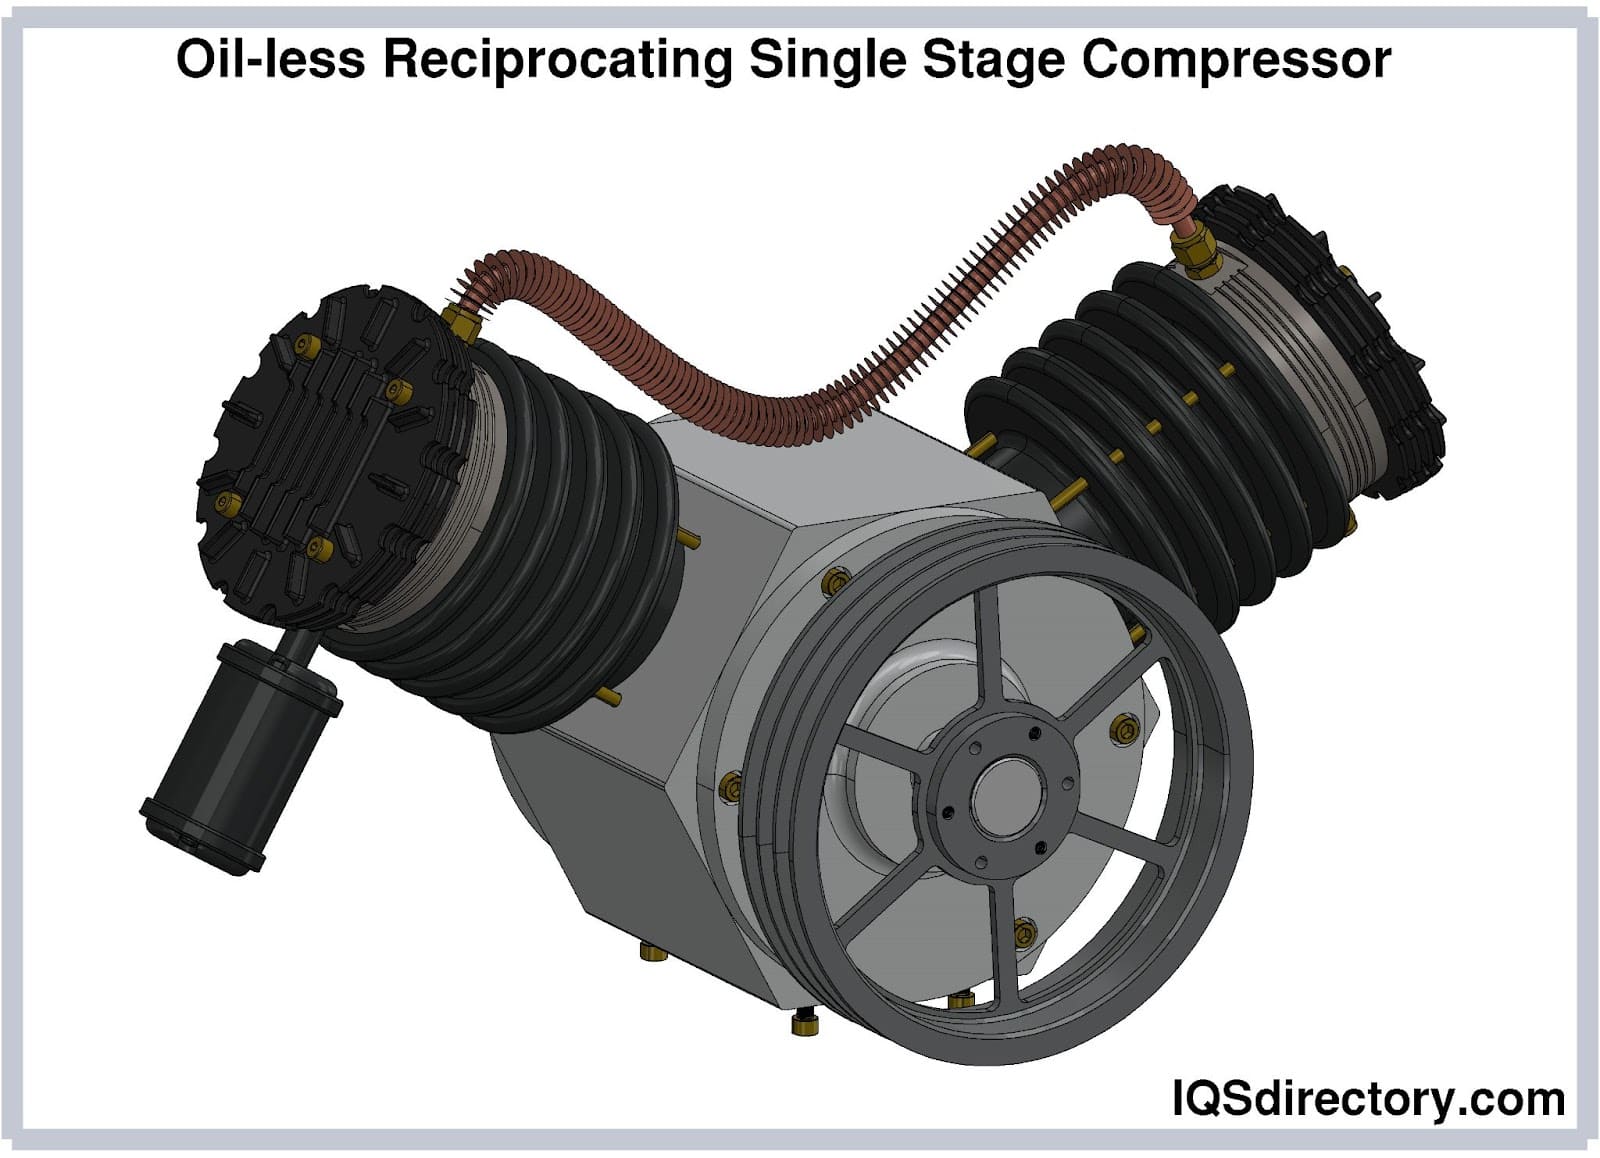 Oil-less Reciprocating Single Stage Compressor